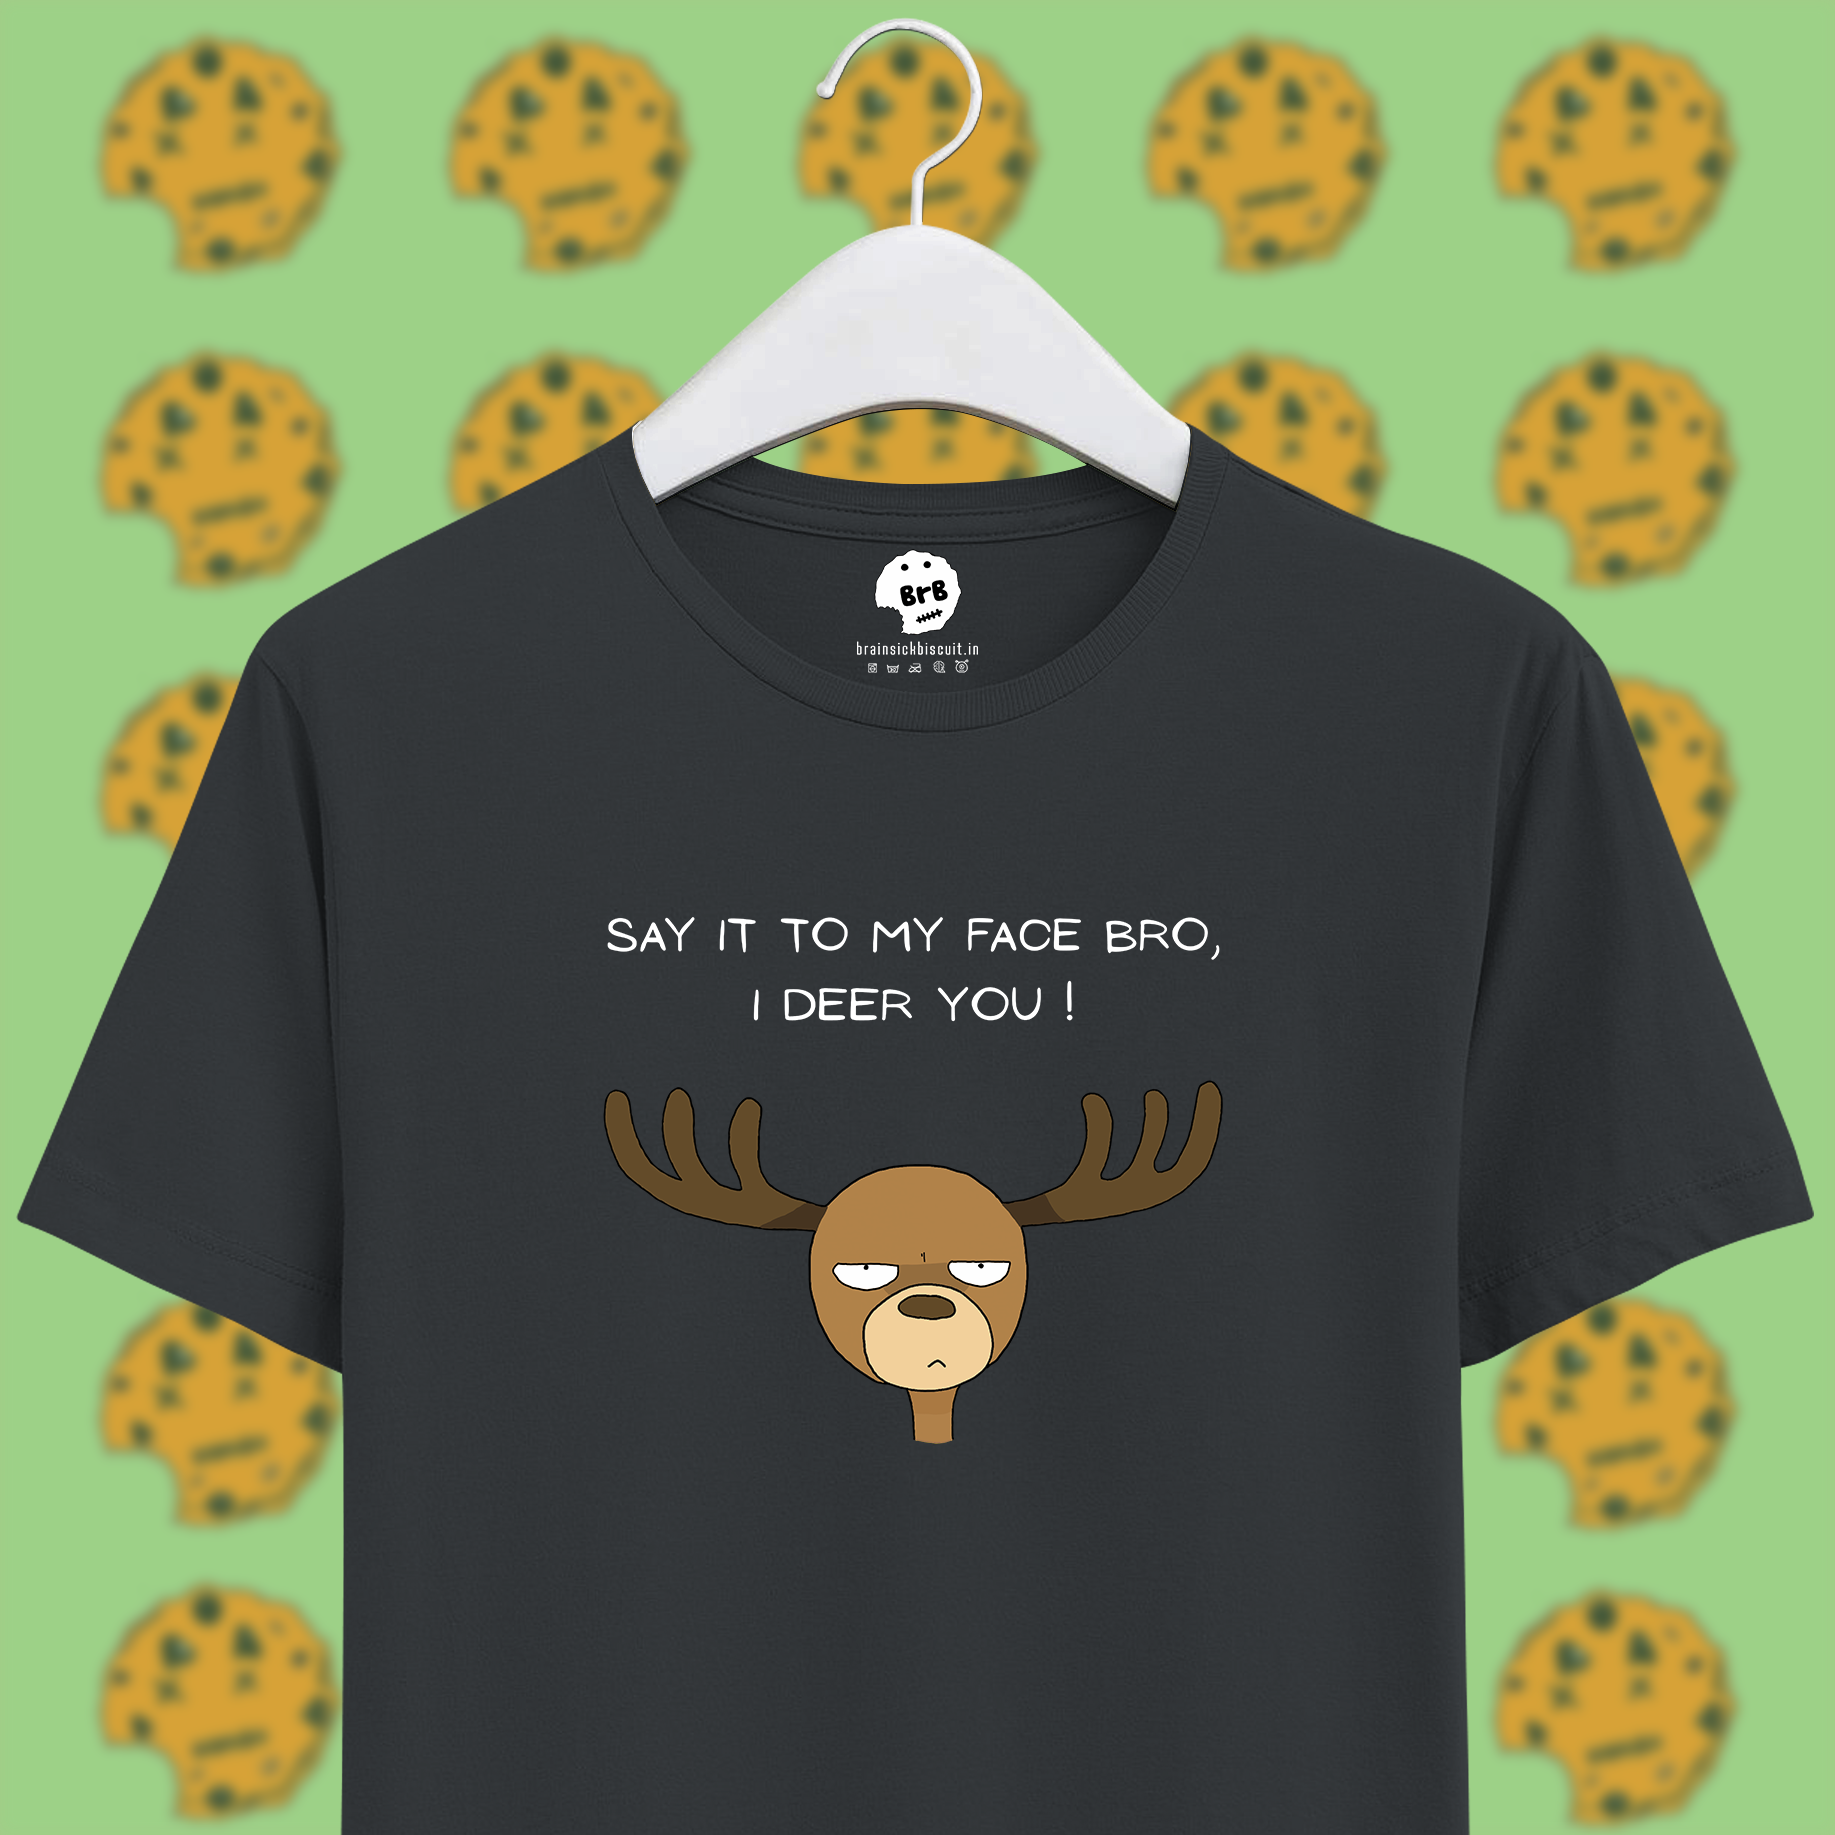 deer pun with say it to my face bro, i deer you text on unisex steel grey half sleeves t-shirt.